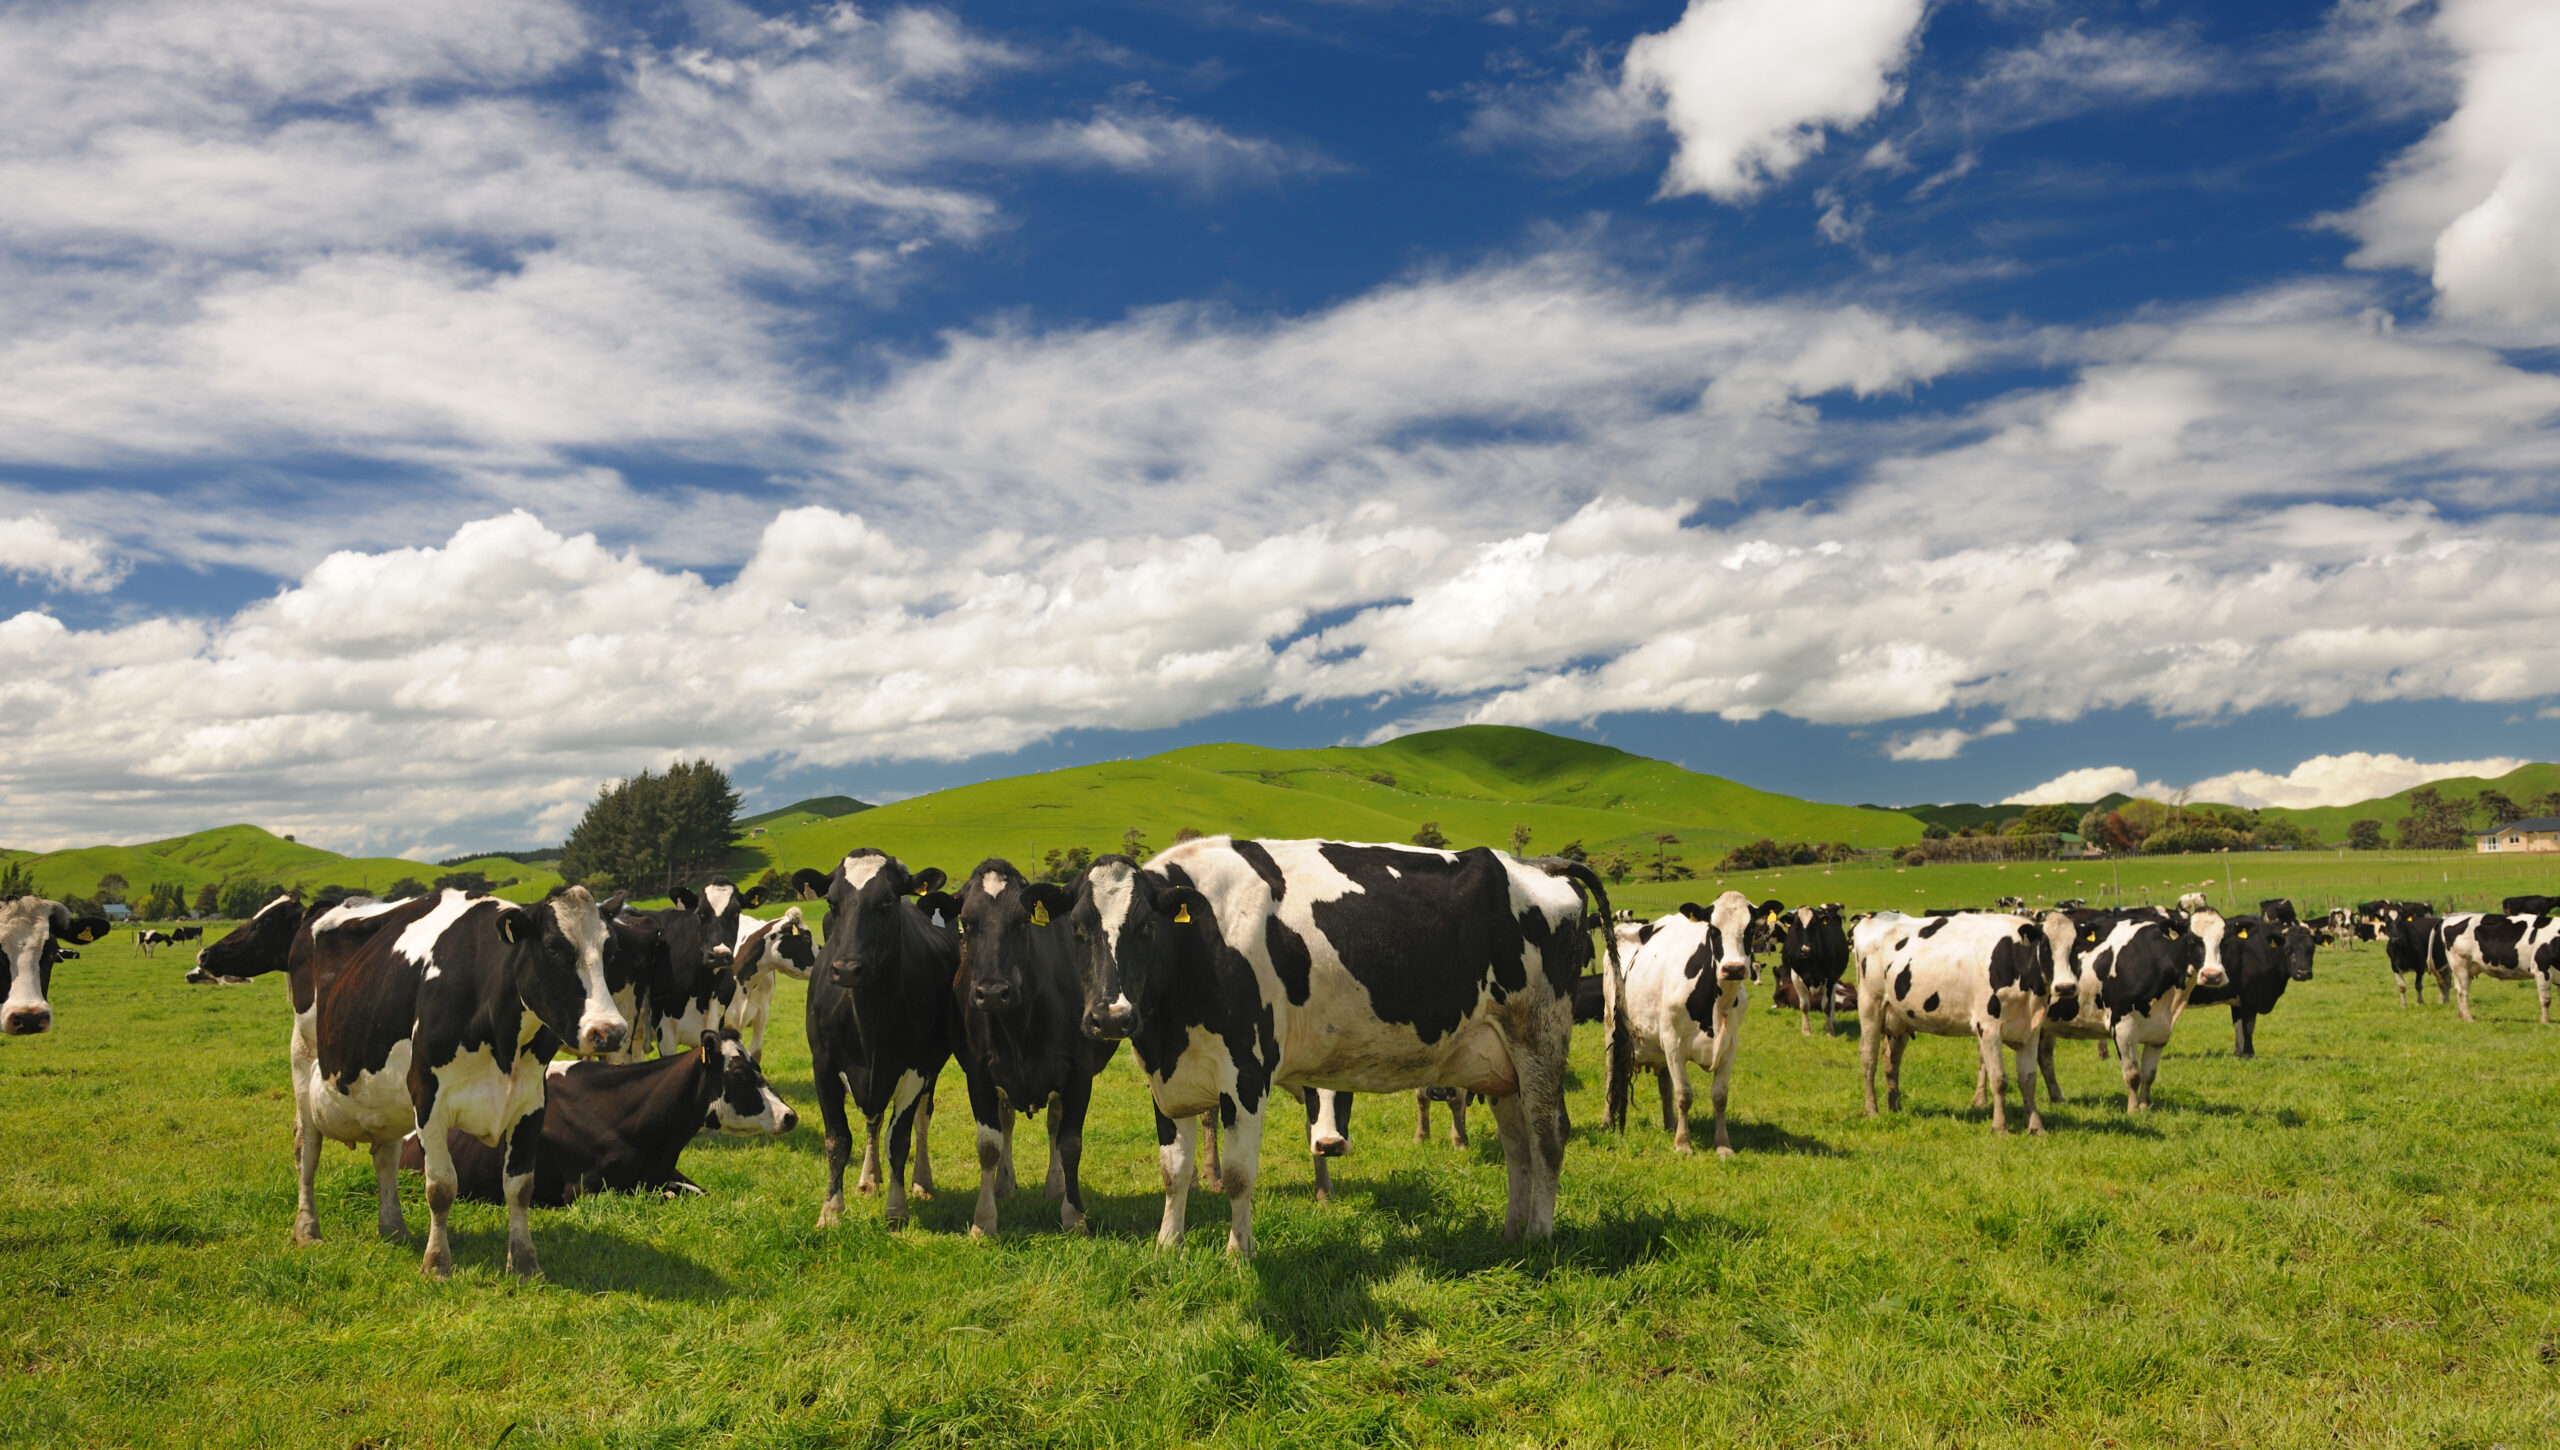 Grassfed cows grazing the field in Karicare's New Zealand Farm